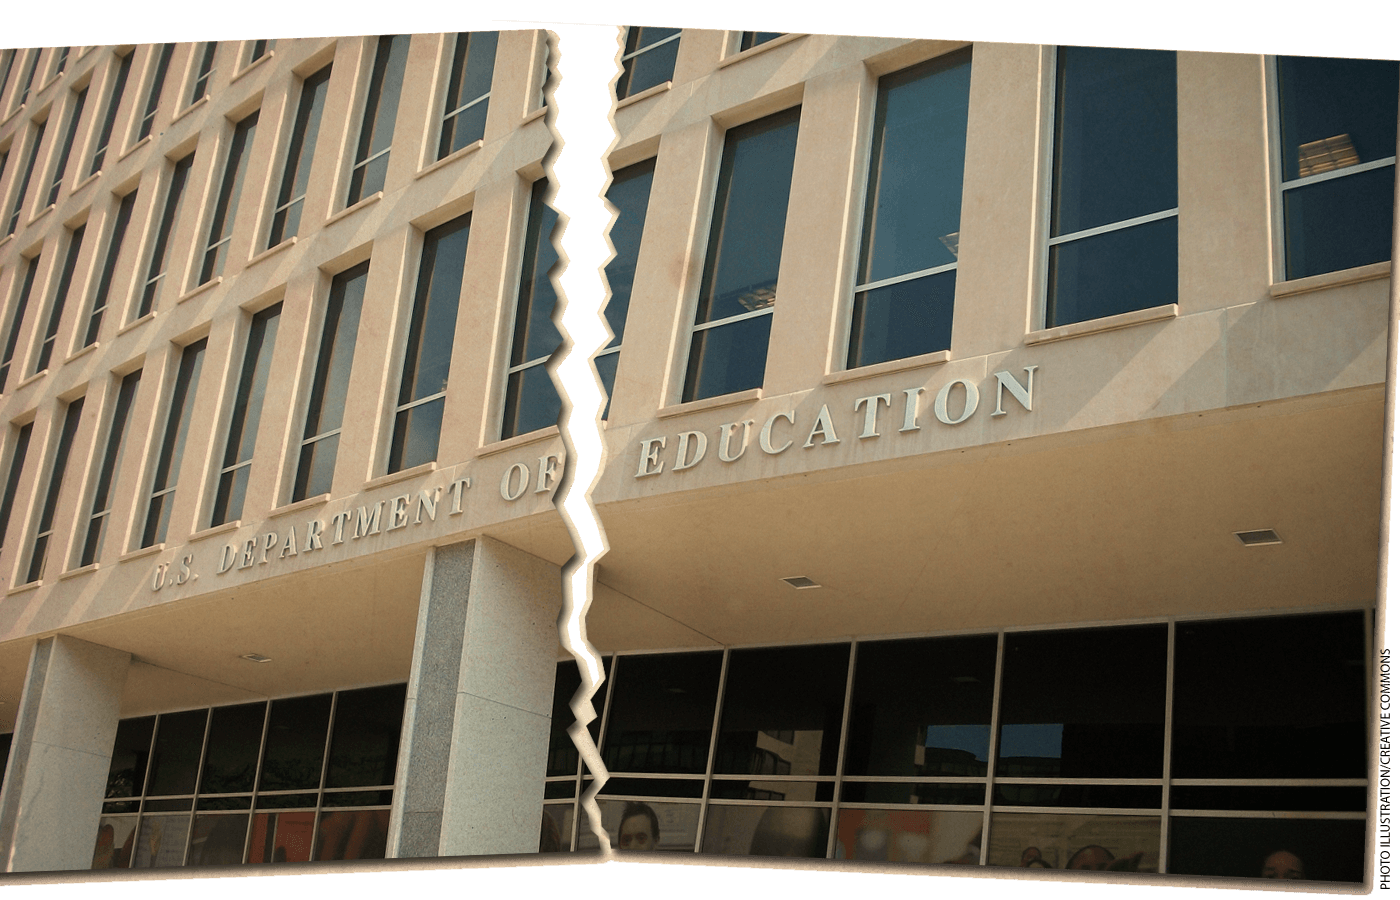 Illustration of a photo of the U.S. Department of Education building torn in half